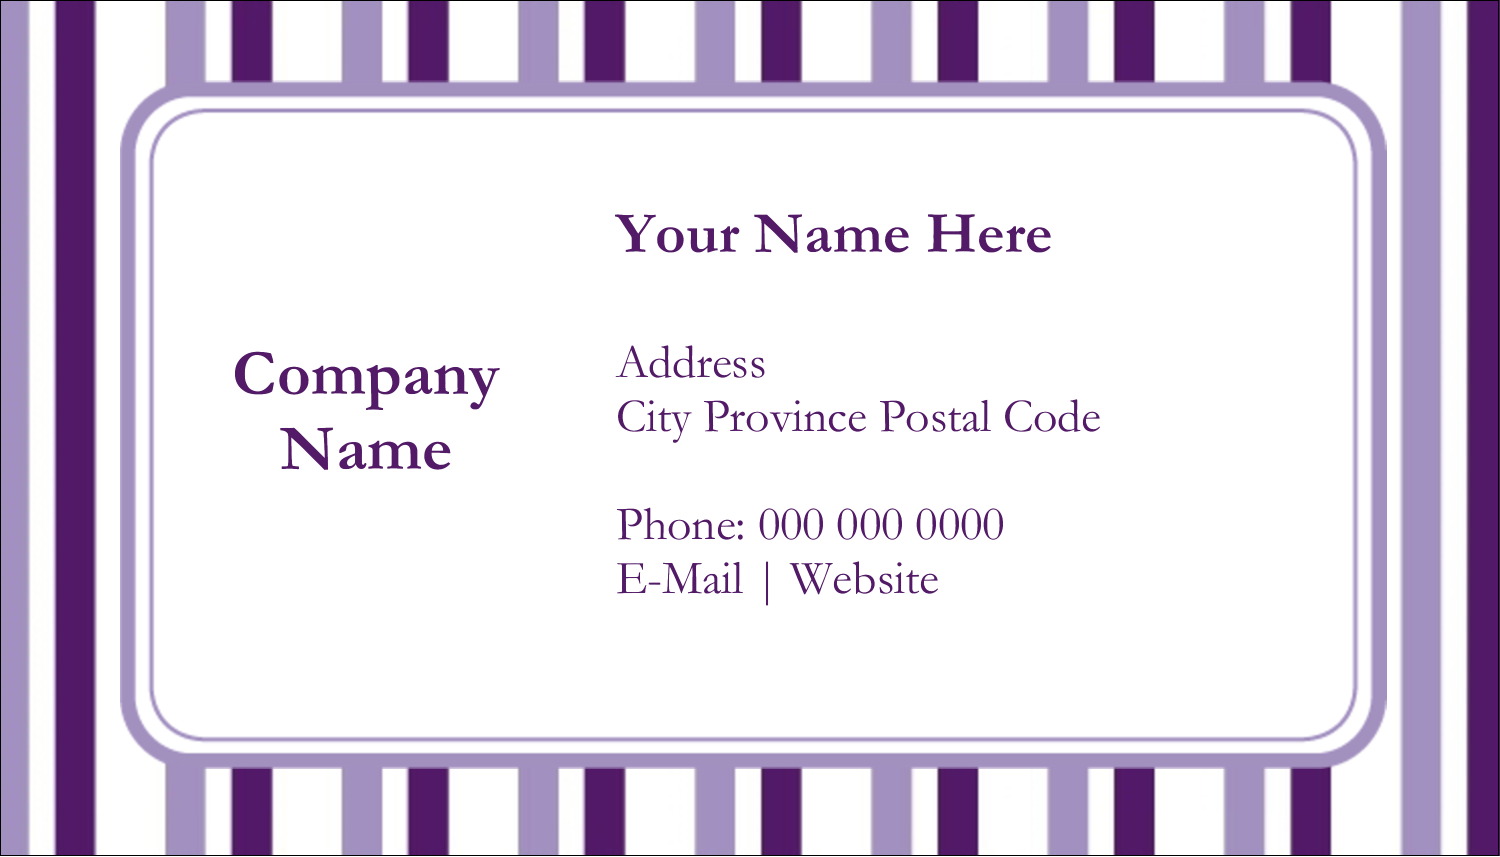 33 Printable Avery Business Card Template 88220 For Free for Avery Business Card Template 88220